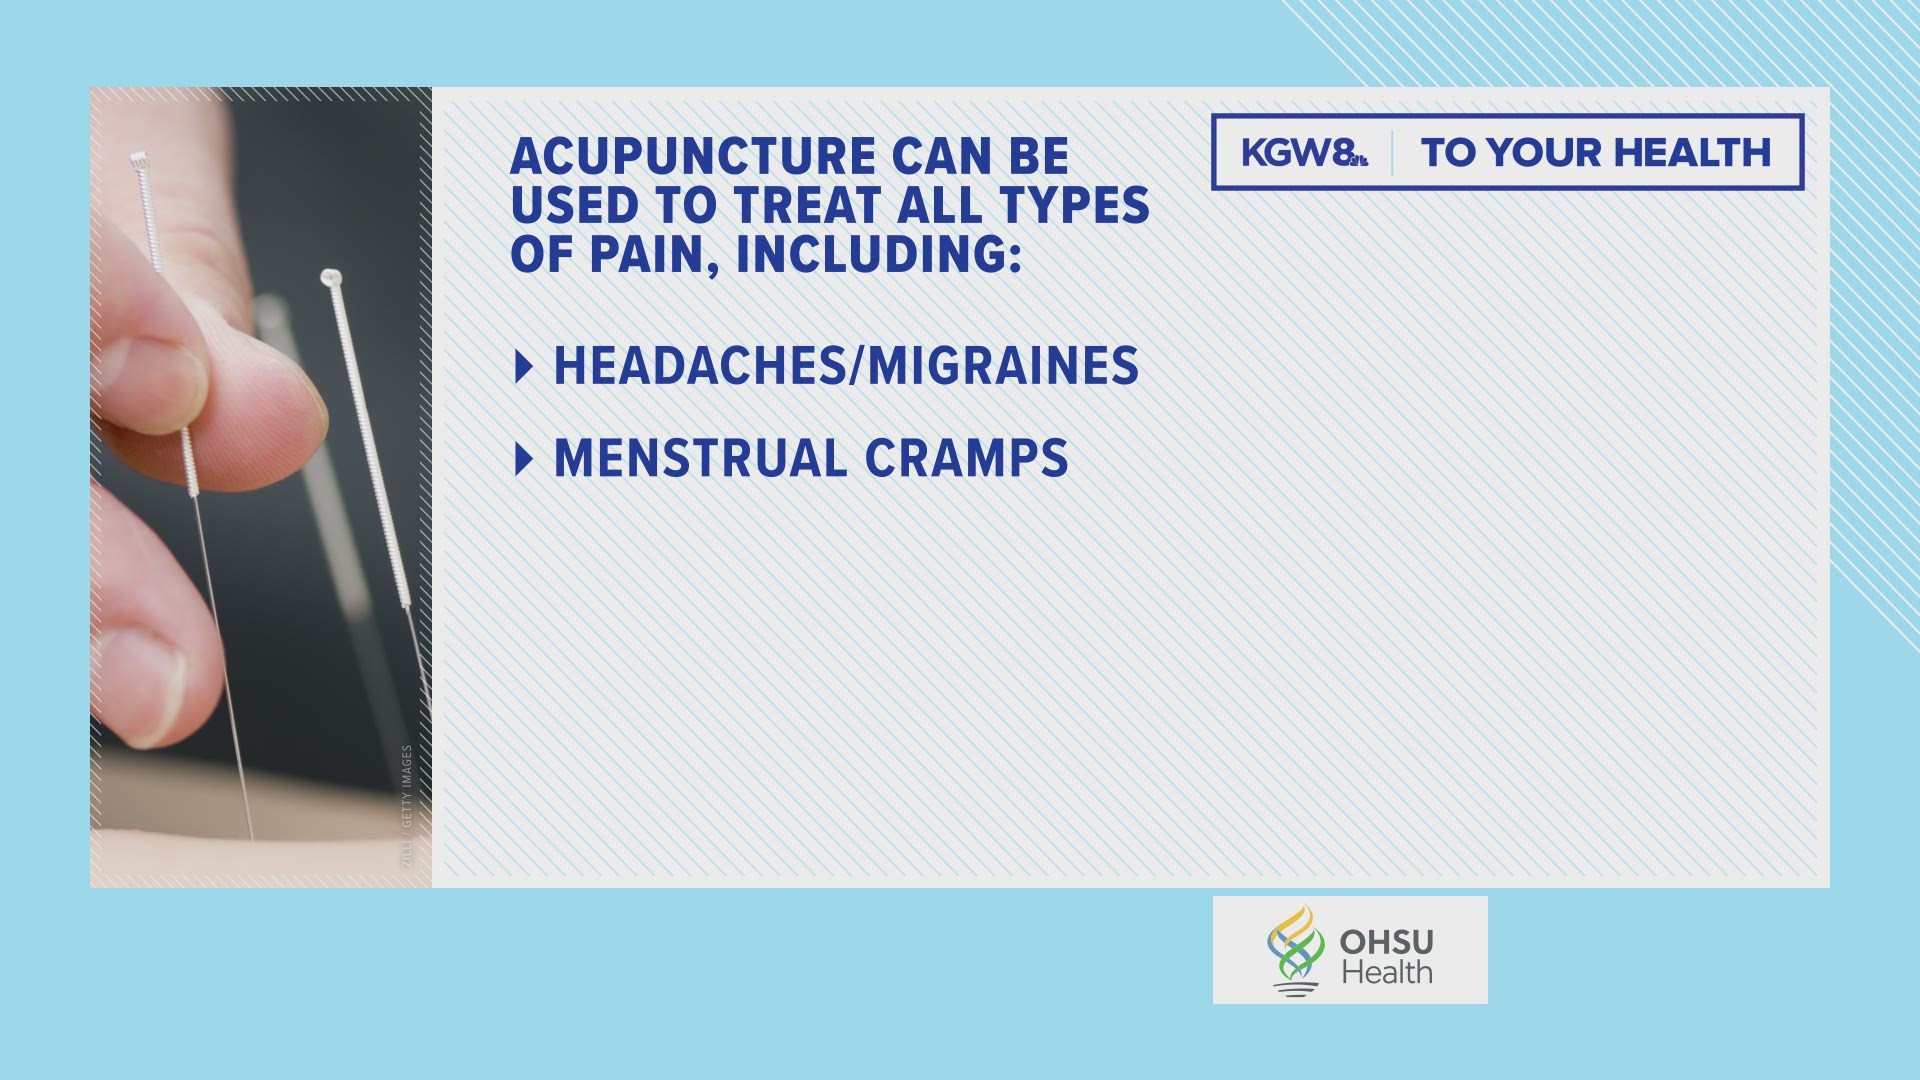 From OHSU Health, here are some types of pain acupuncture can be used to treat.